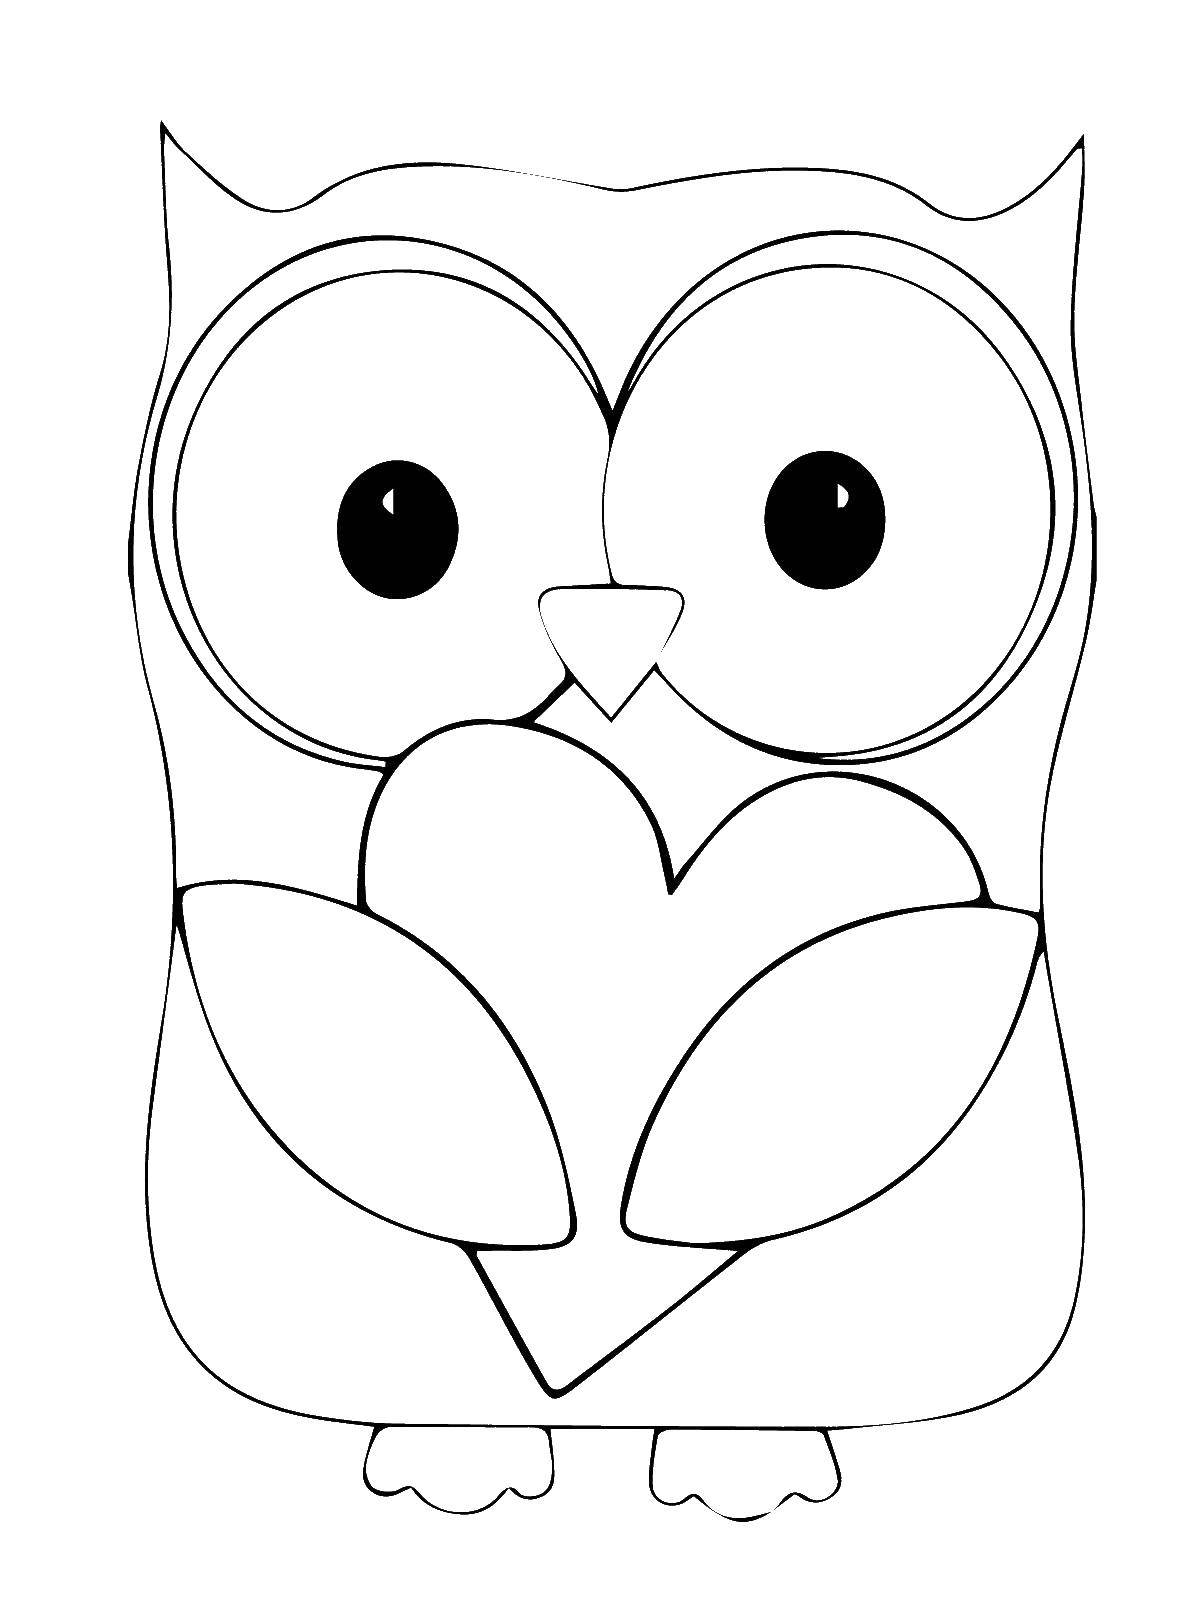 Coloring Sovushka. Category simple coloring. Tags:  Birds, owl.